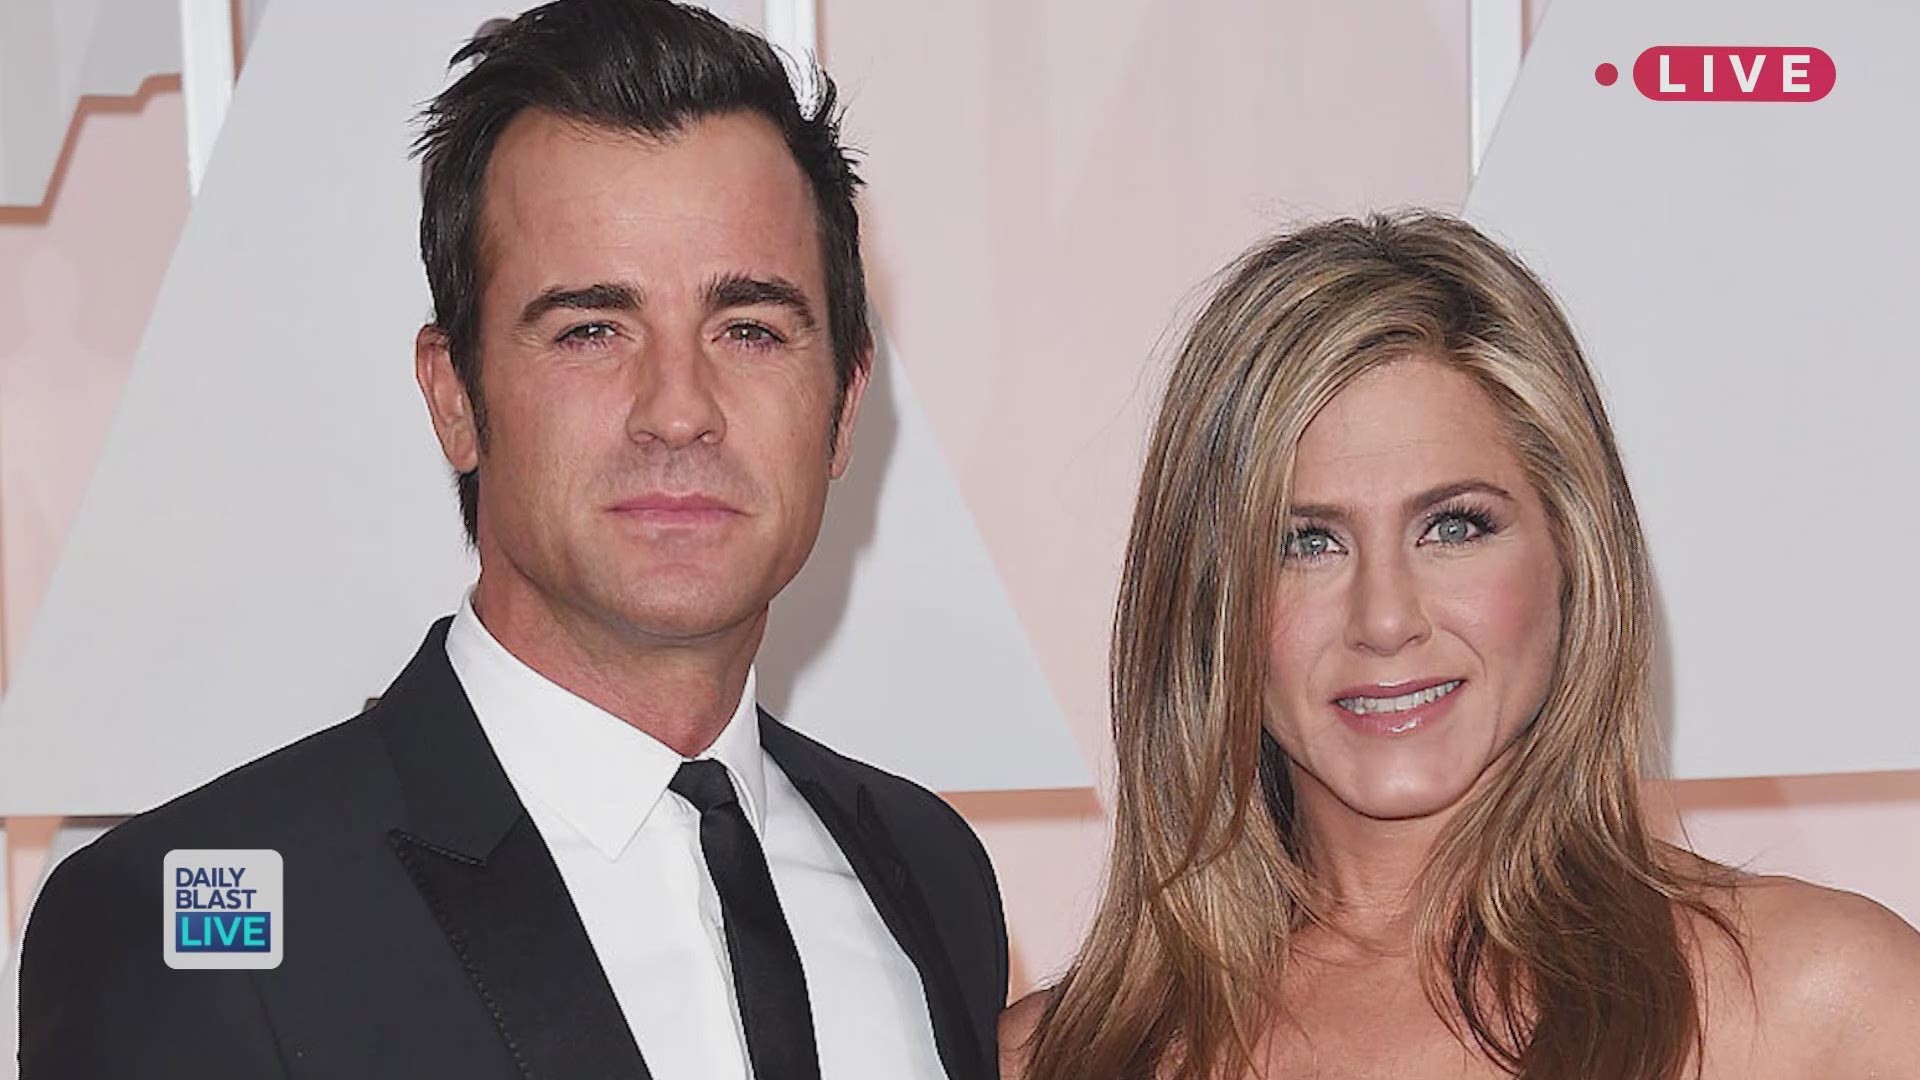 Celebrity couple Jennifer Aniston and Justin Theroux are in the middle of a nasty divorce and the main culprit is their fluffy friends. The former couple are in a heated custody battle over their four dogs and there is no sign of any resolution. Daily Bla